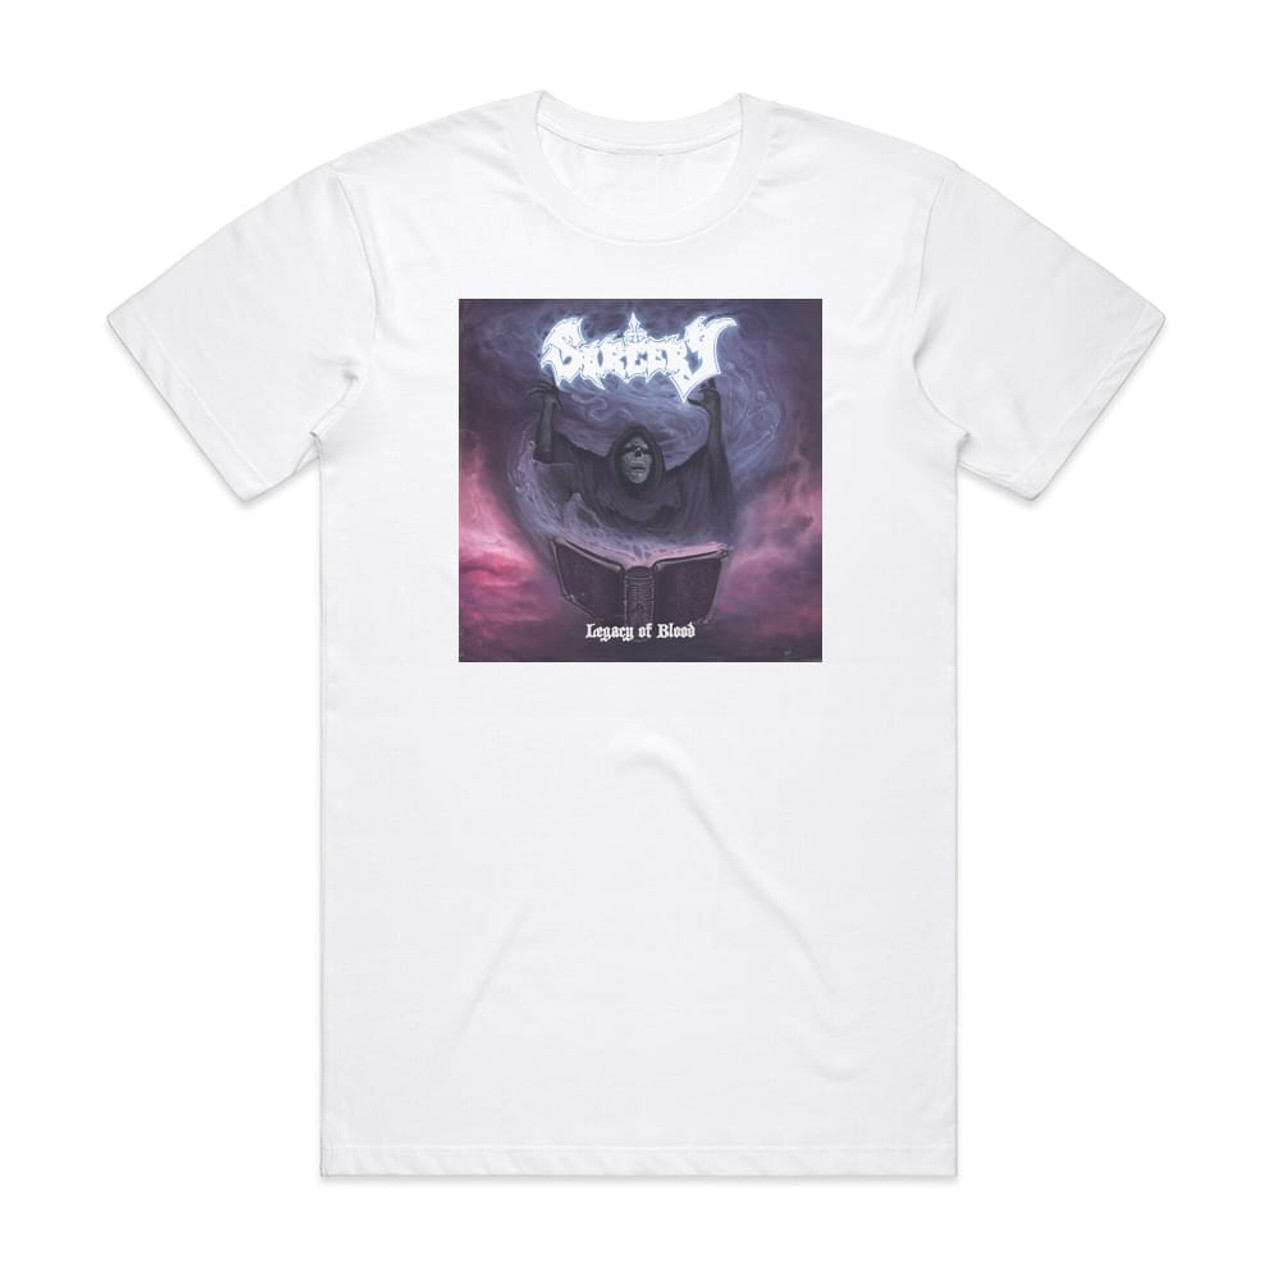 Sorcery Legacy Of Blood Album Cover T-Shirt White